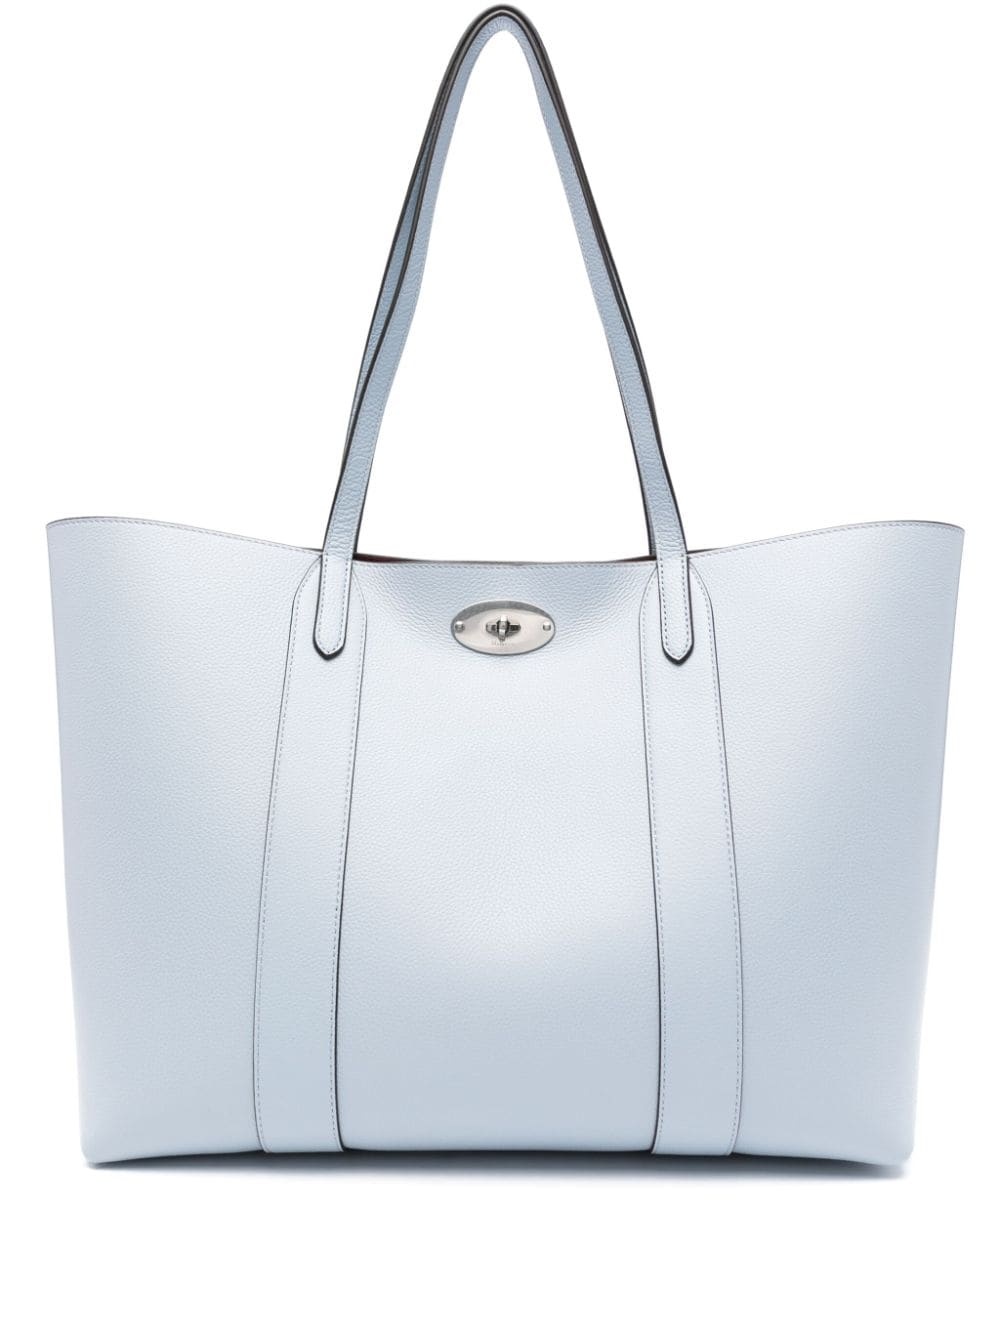 Bayswater leather tote bag - 1